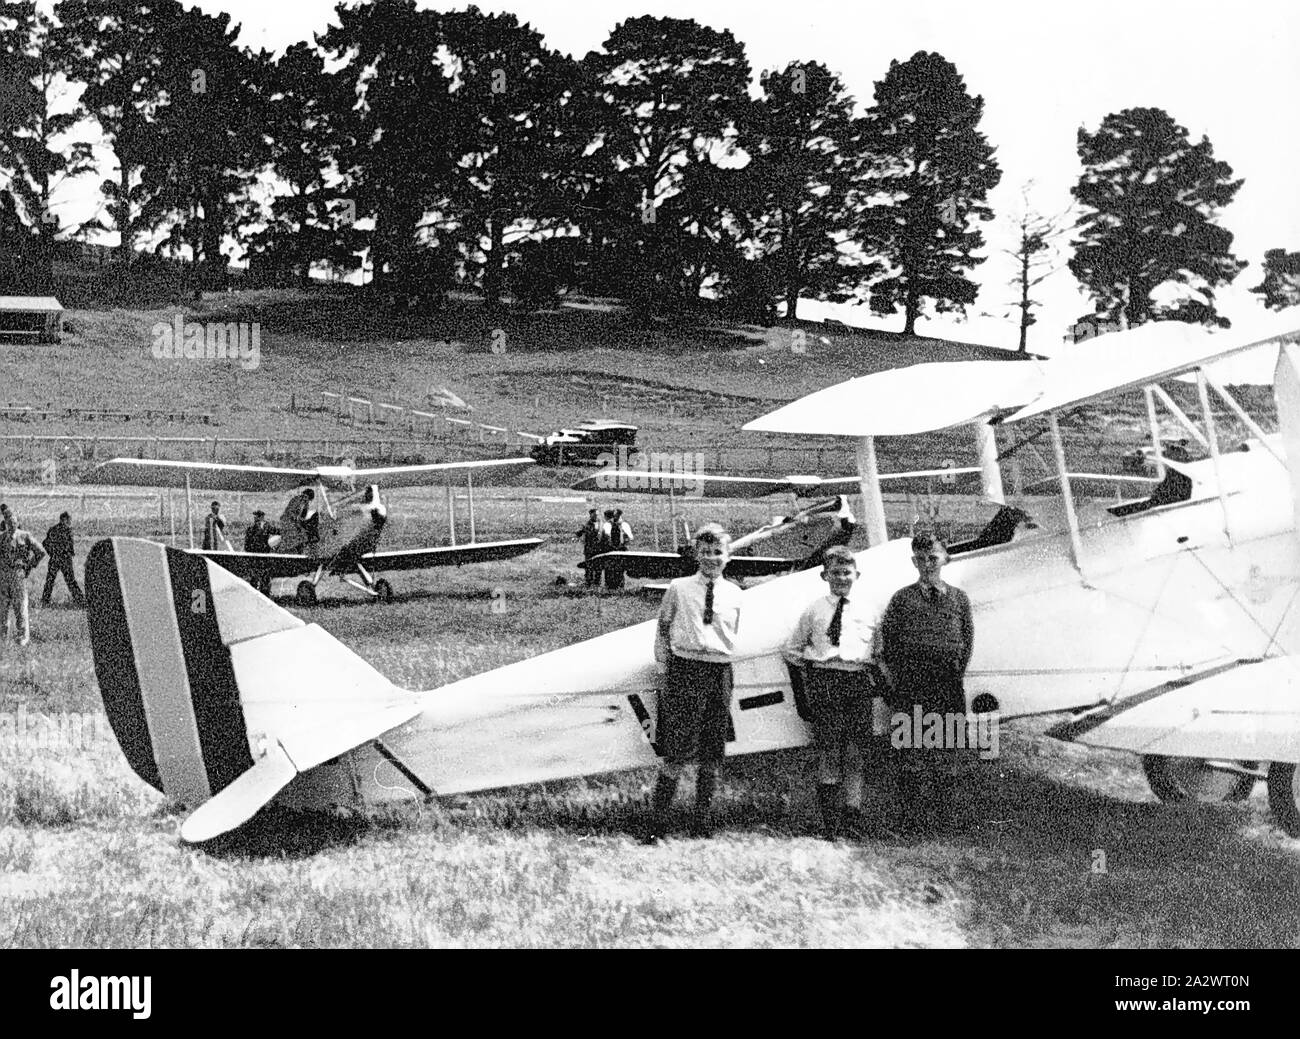 Negative - Gypsy Moth Aeroplanes, Casterton, Victoria, 1935, A group of aircraft at the Casterton Racecourse. The aircraft appear to be Gypsy Moths Stock Photo